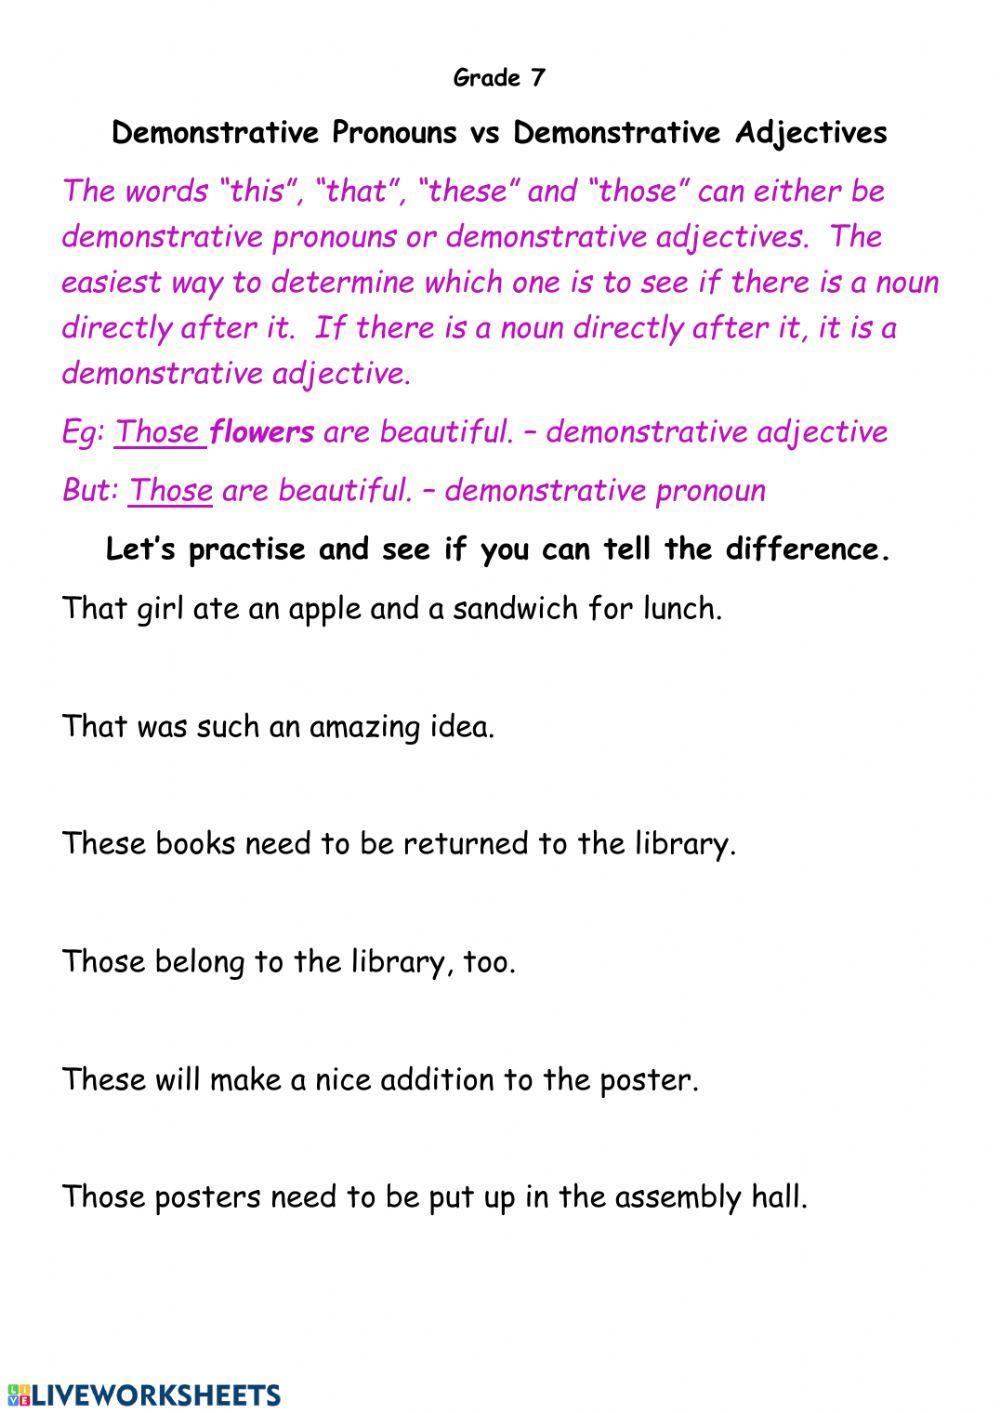 Demonstrative Pronouns and Adjectives